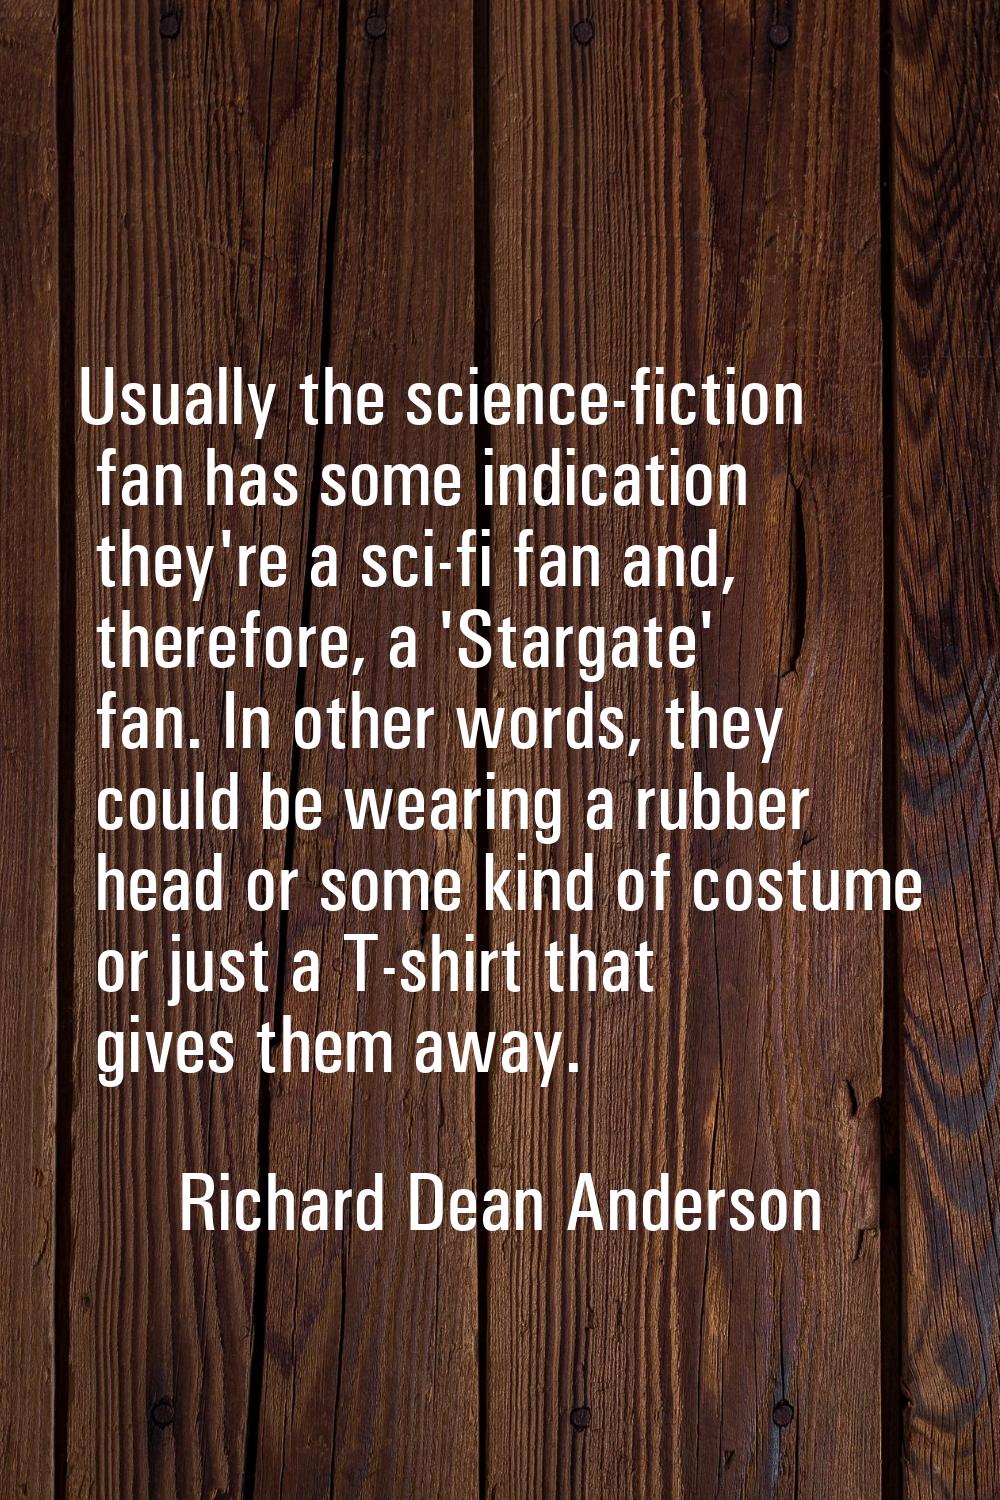 Usually the science-fiction fan has some indication they're a sci-fi fan and, therefore, a 'Stargat